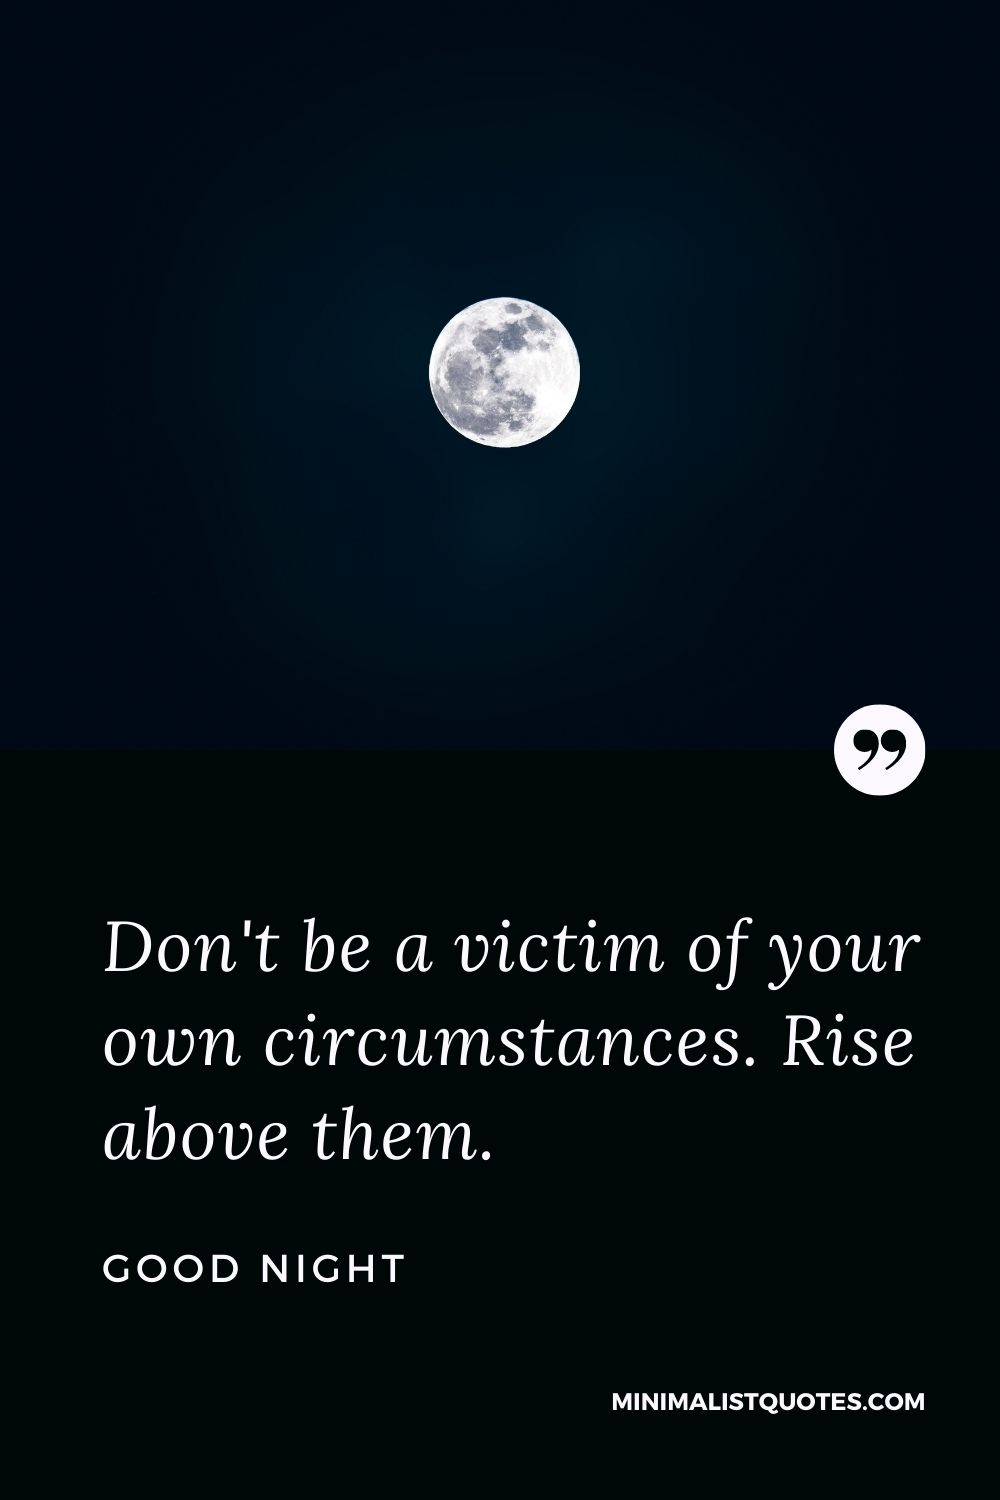 Good Night Wish & Message With Image: Don't be a victim of your own circumstances. Rise above them.